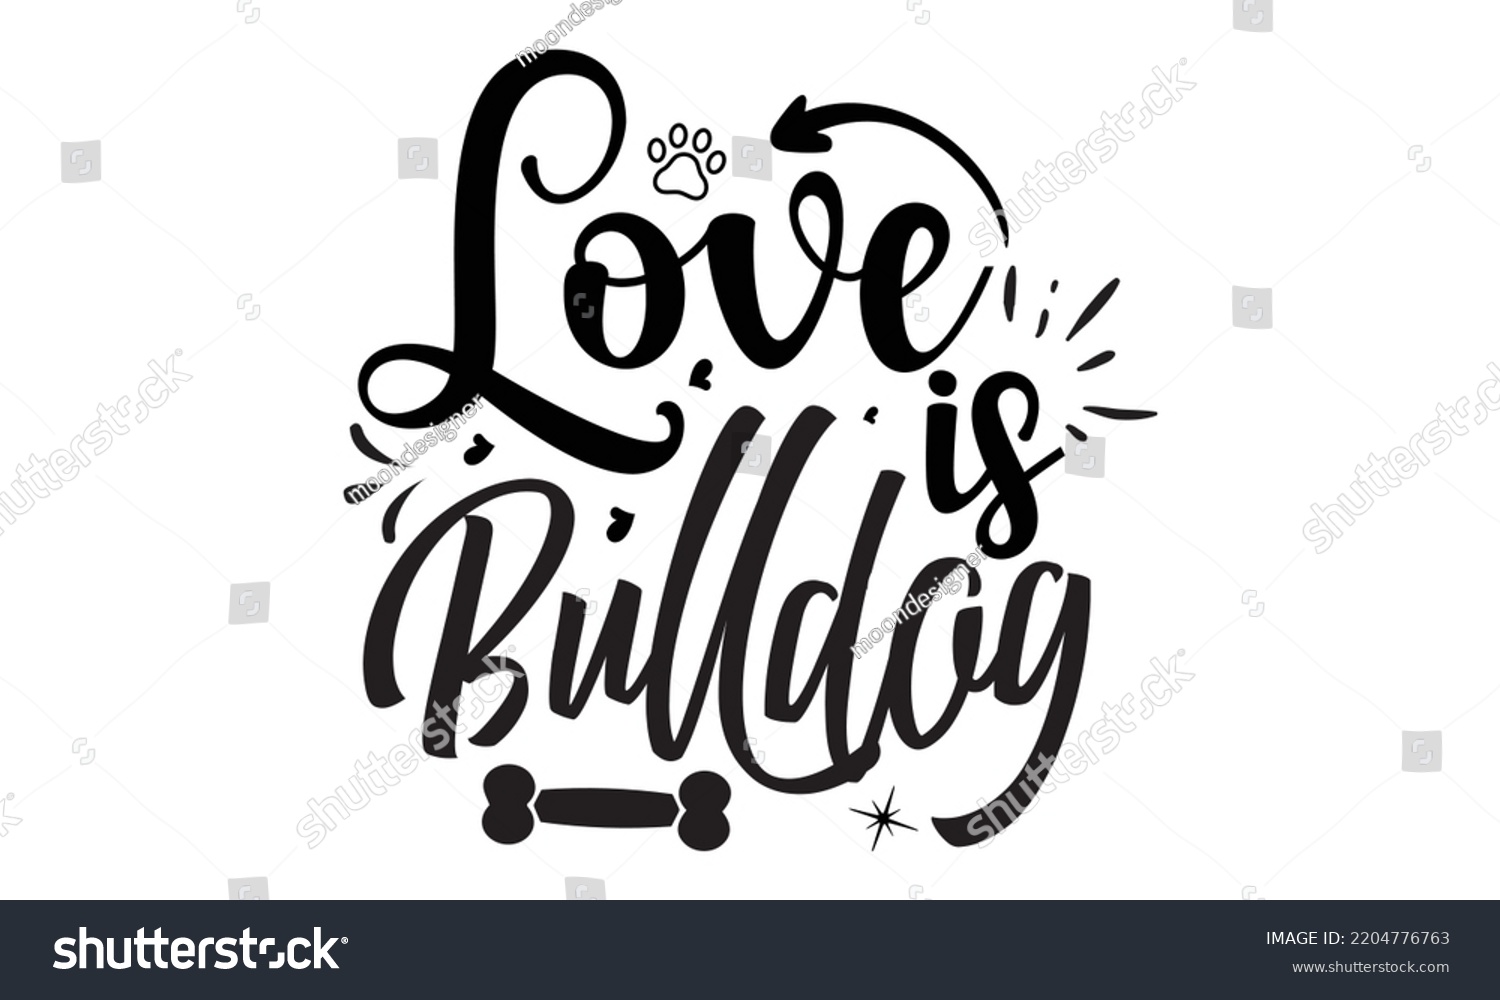 SVG of Love is bulldog - Bullodog T-shirt and SVG Design,  Dog lover t shirt design gift for women, typography design, can you download this Design, svg Files for Cutting and Silhouette EPS, 10 svg